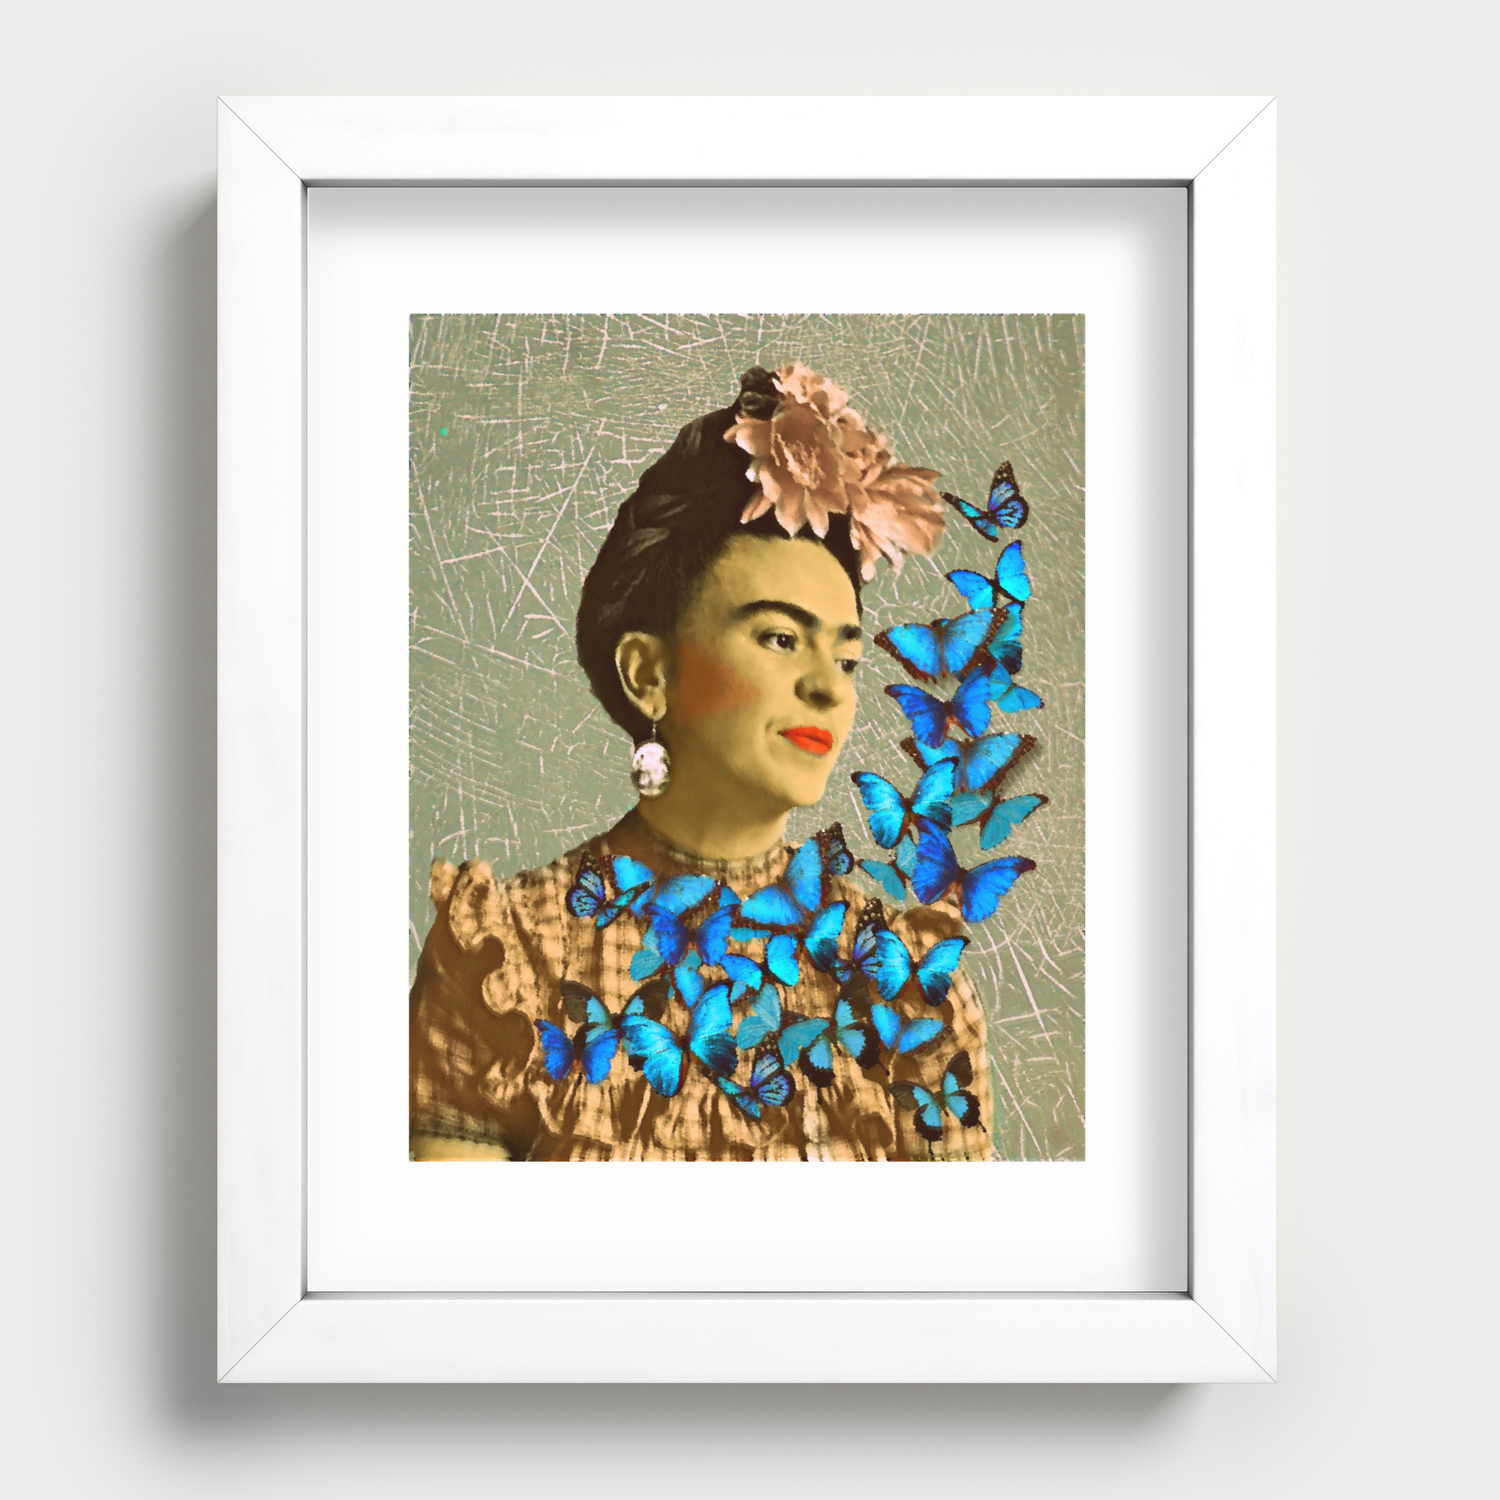 Frida Kahlo And Butterfly Reprint On Framed Canvas Wall Art Home Decoration 